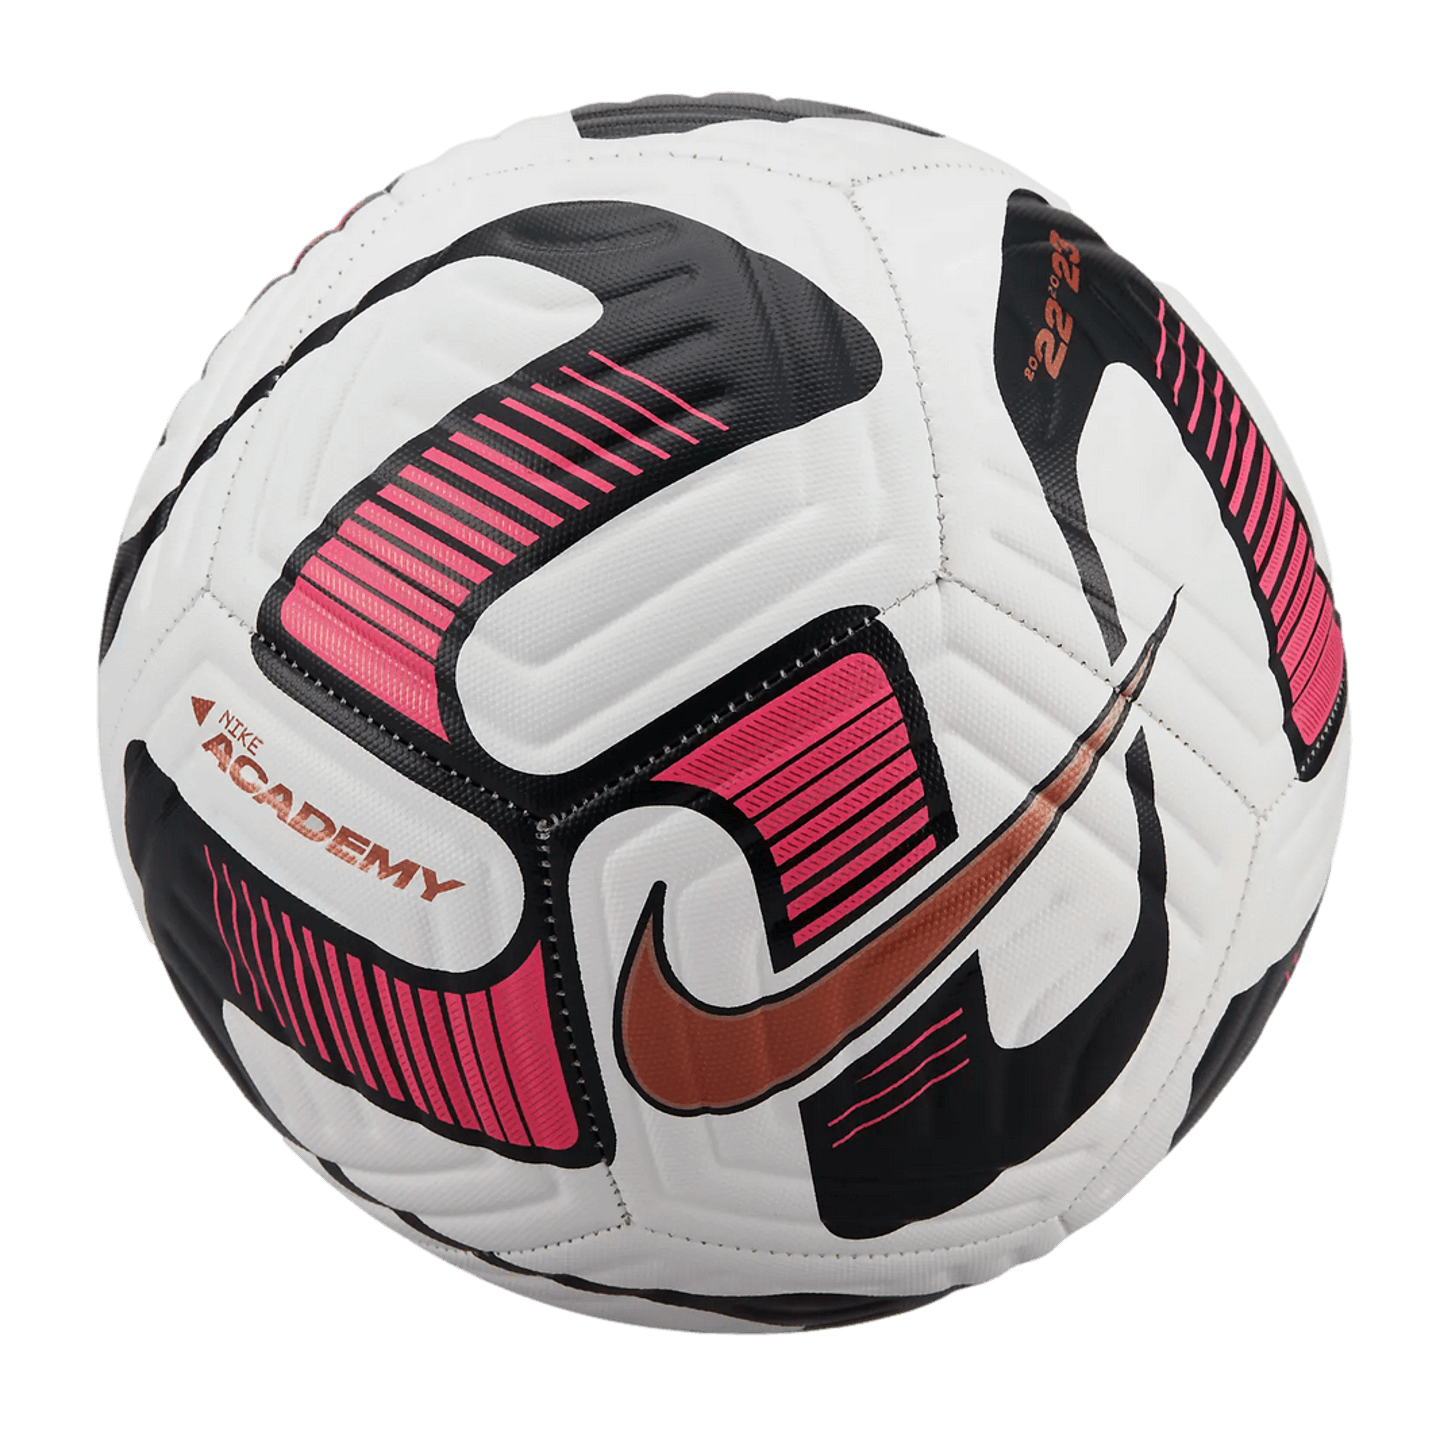 Classical Nike Academy Ball sale now on ordersoccer.com | Delivery included